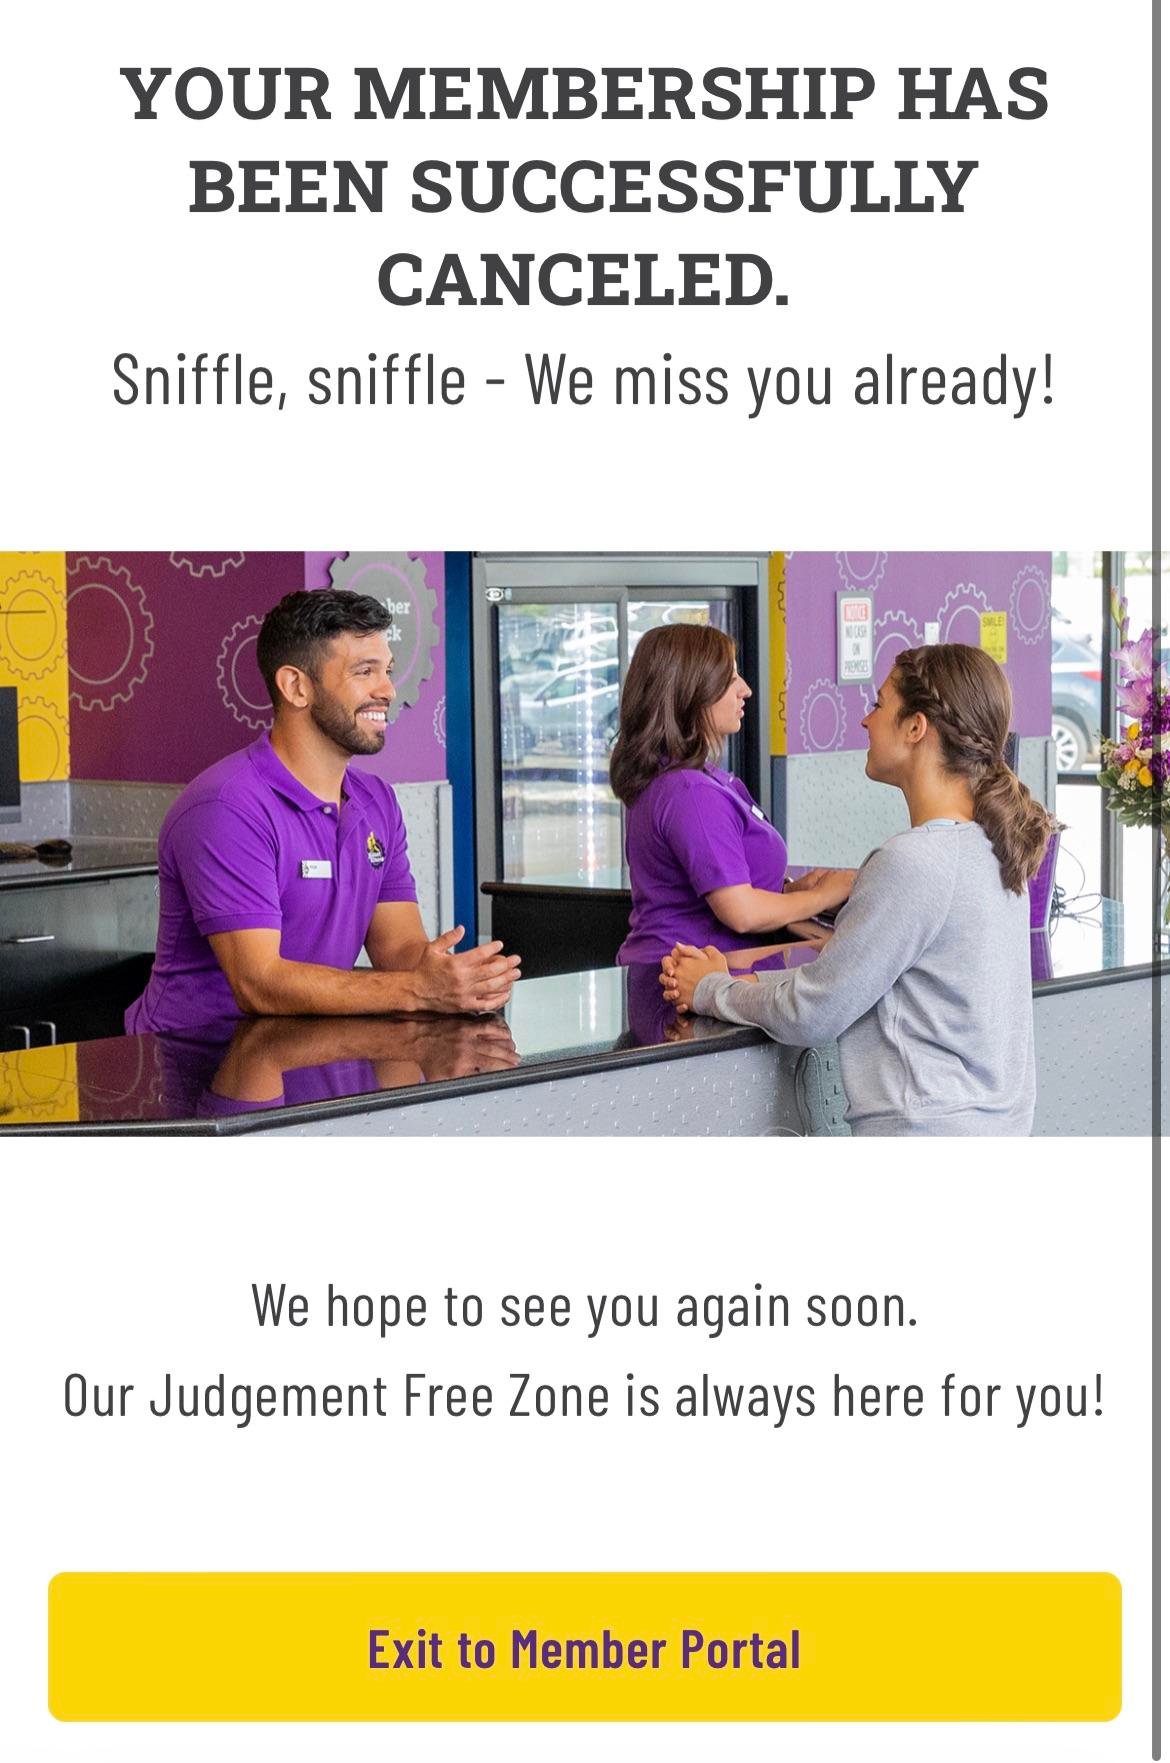 Can You Cancel a Planet Fitness Membership Online